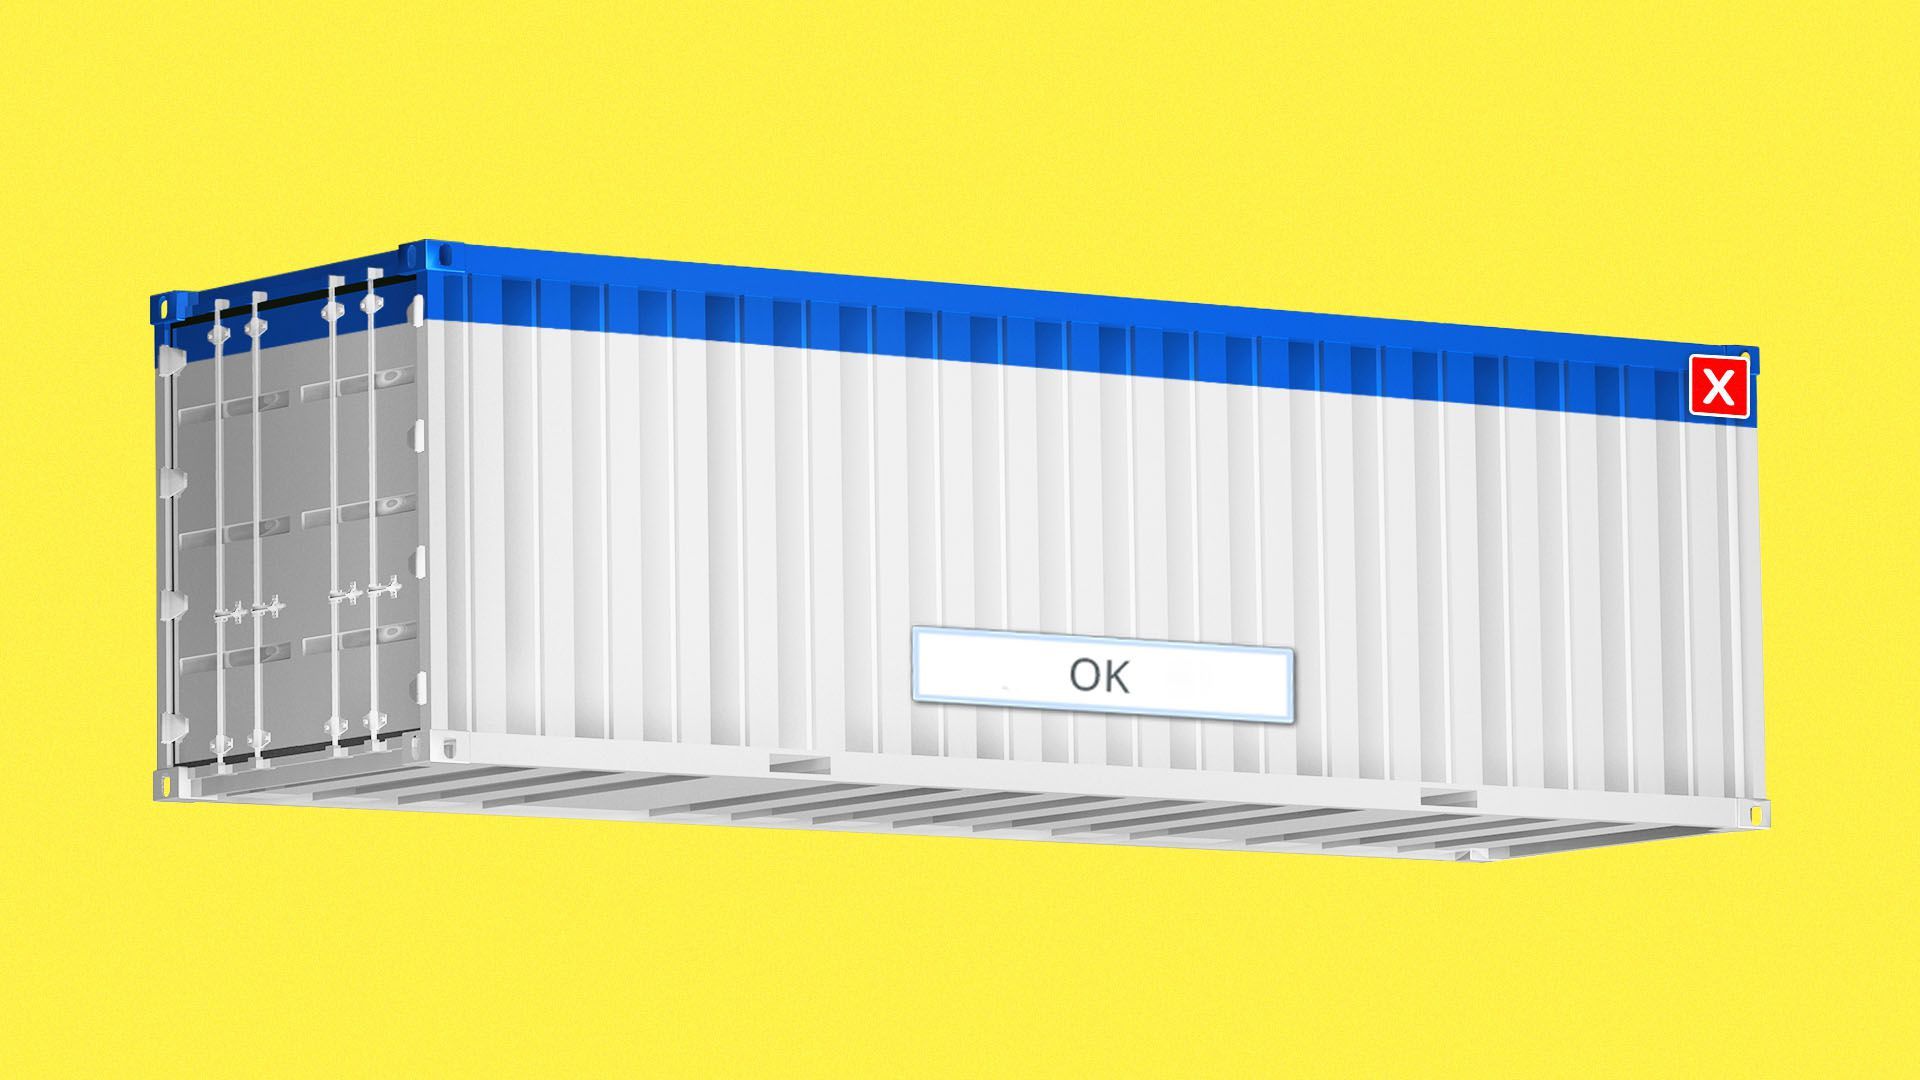 illustration of a computer pop up window made out of a shipping container